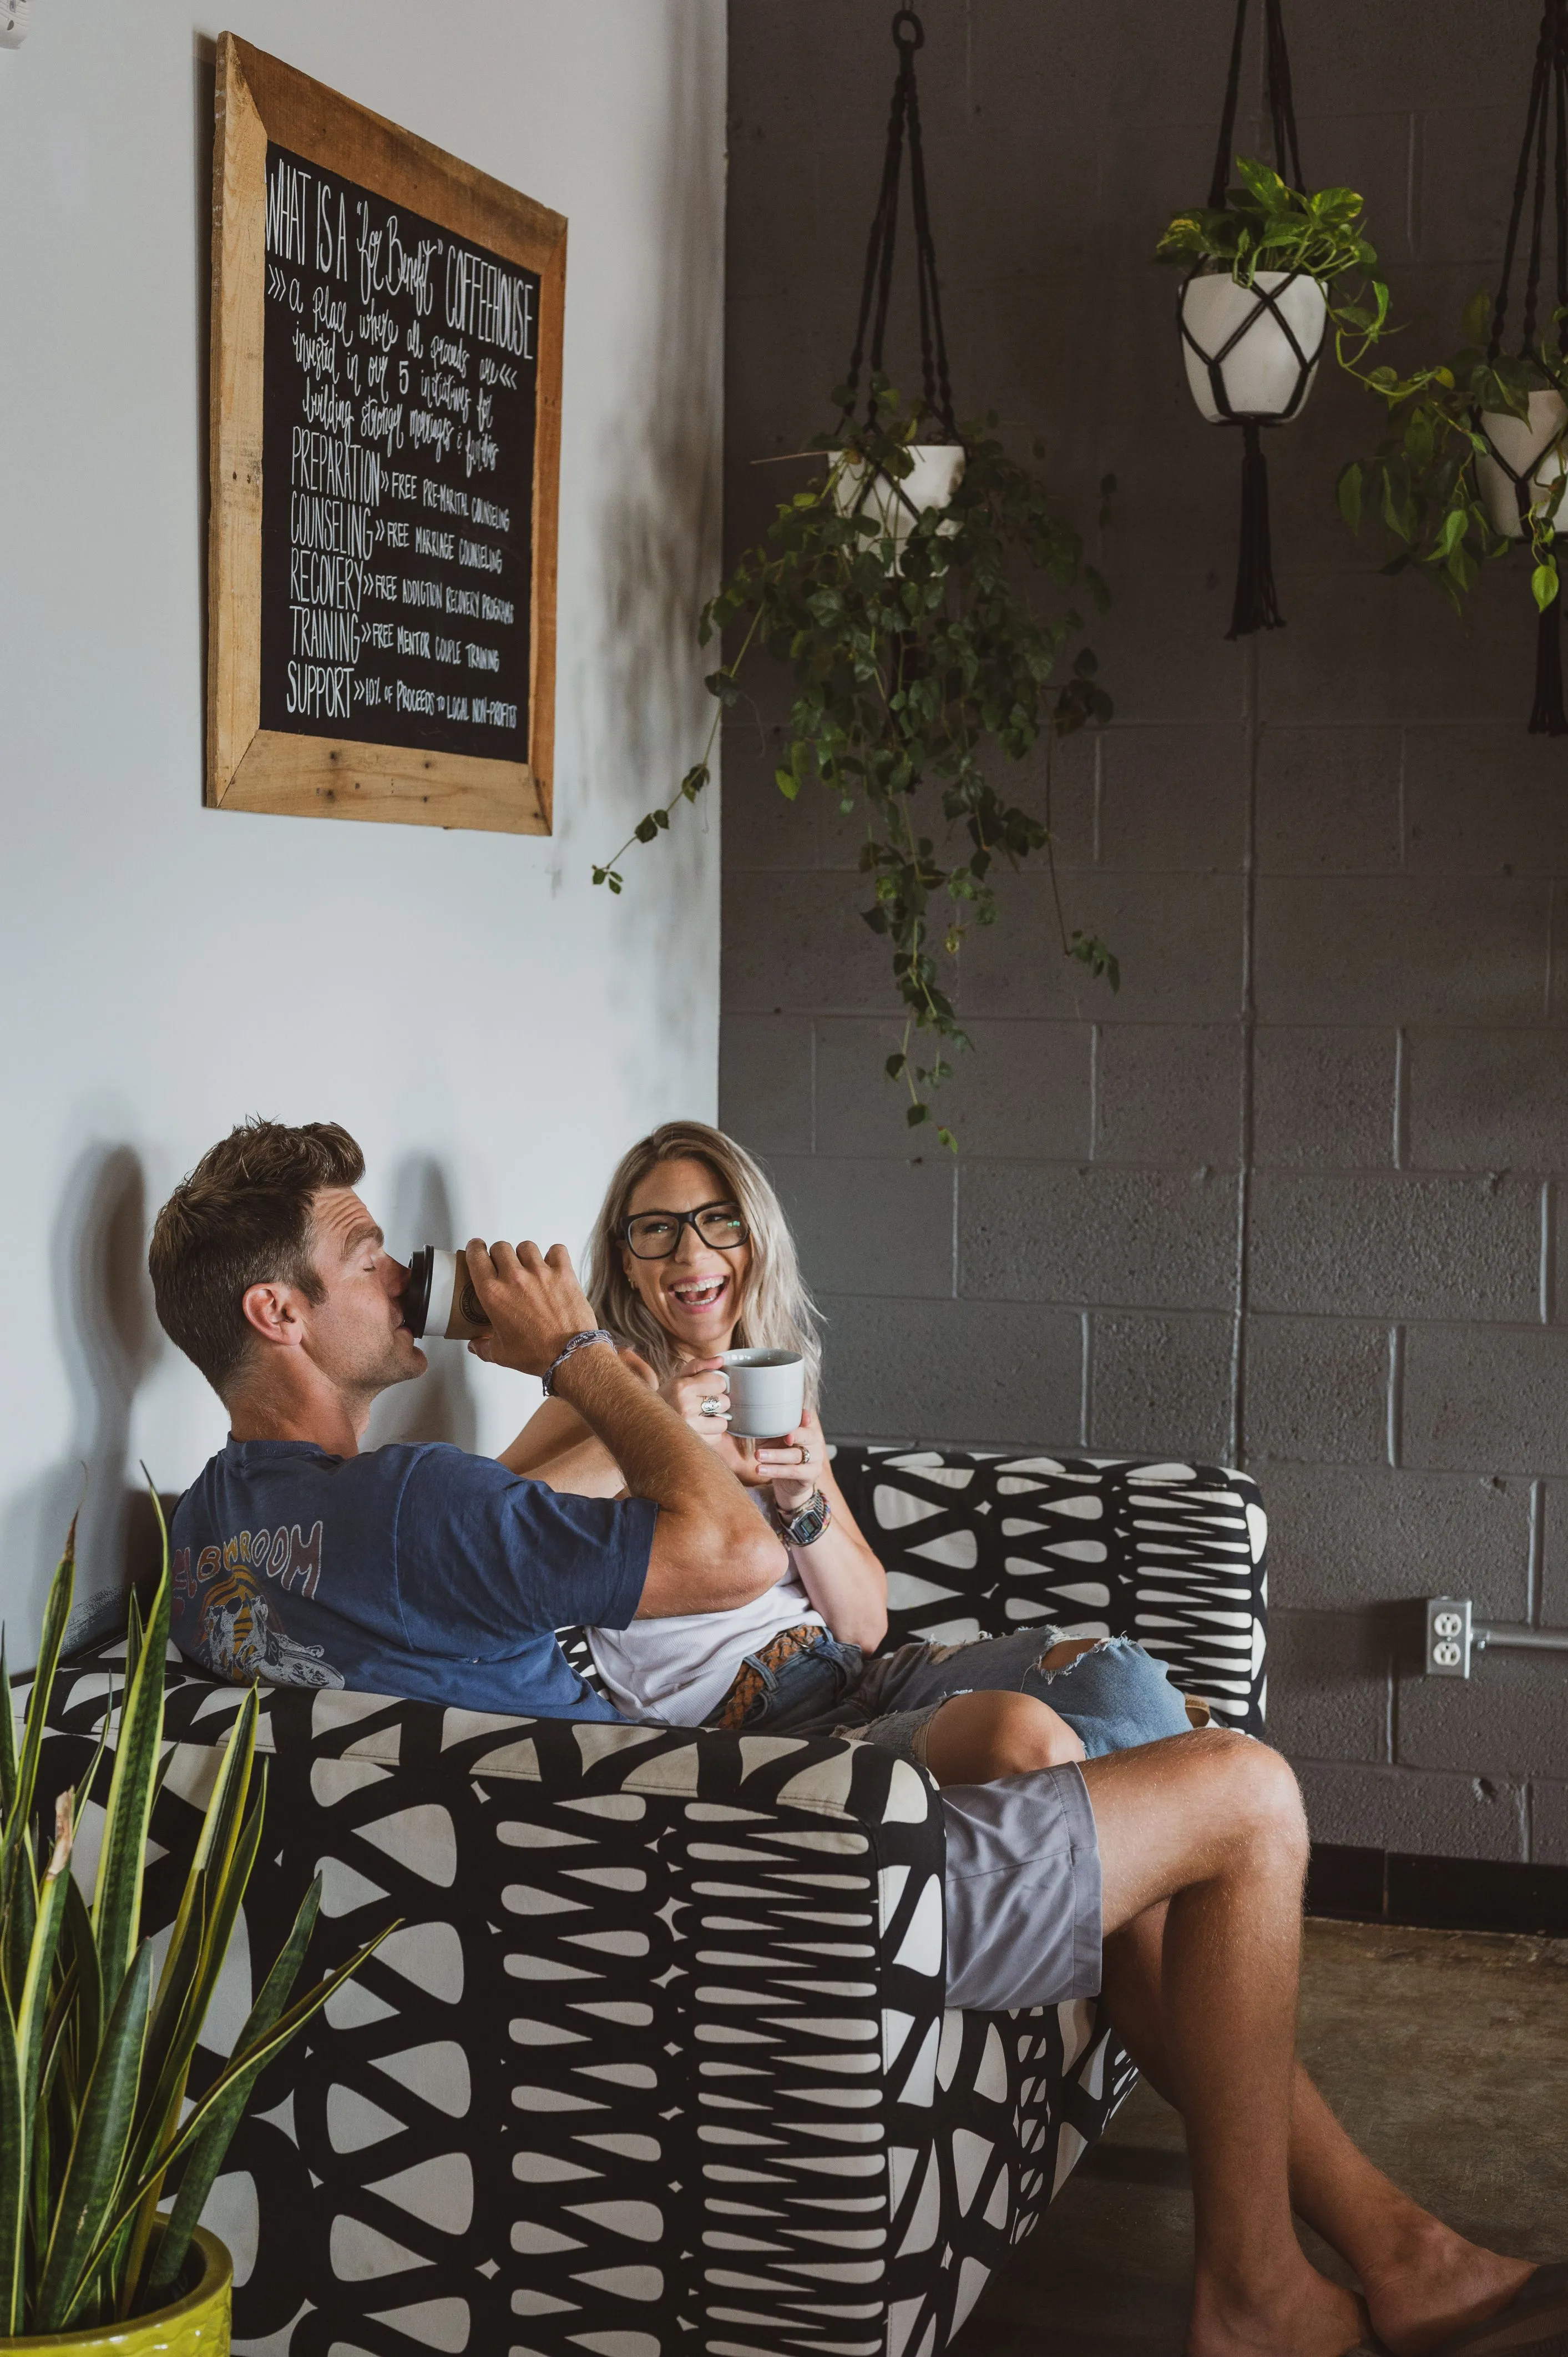 A man and a woman sitting on a patterned couch, enjoying coffee together in a cozy coffee shop setting with hanging plants and a chalkboard menu in the background.